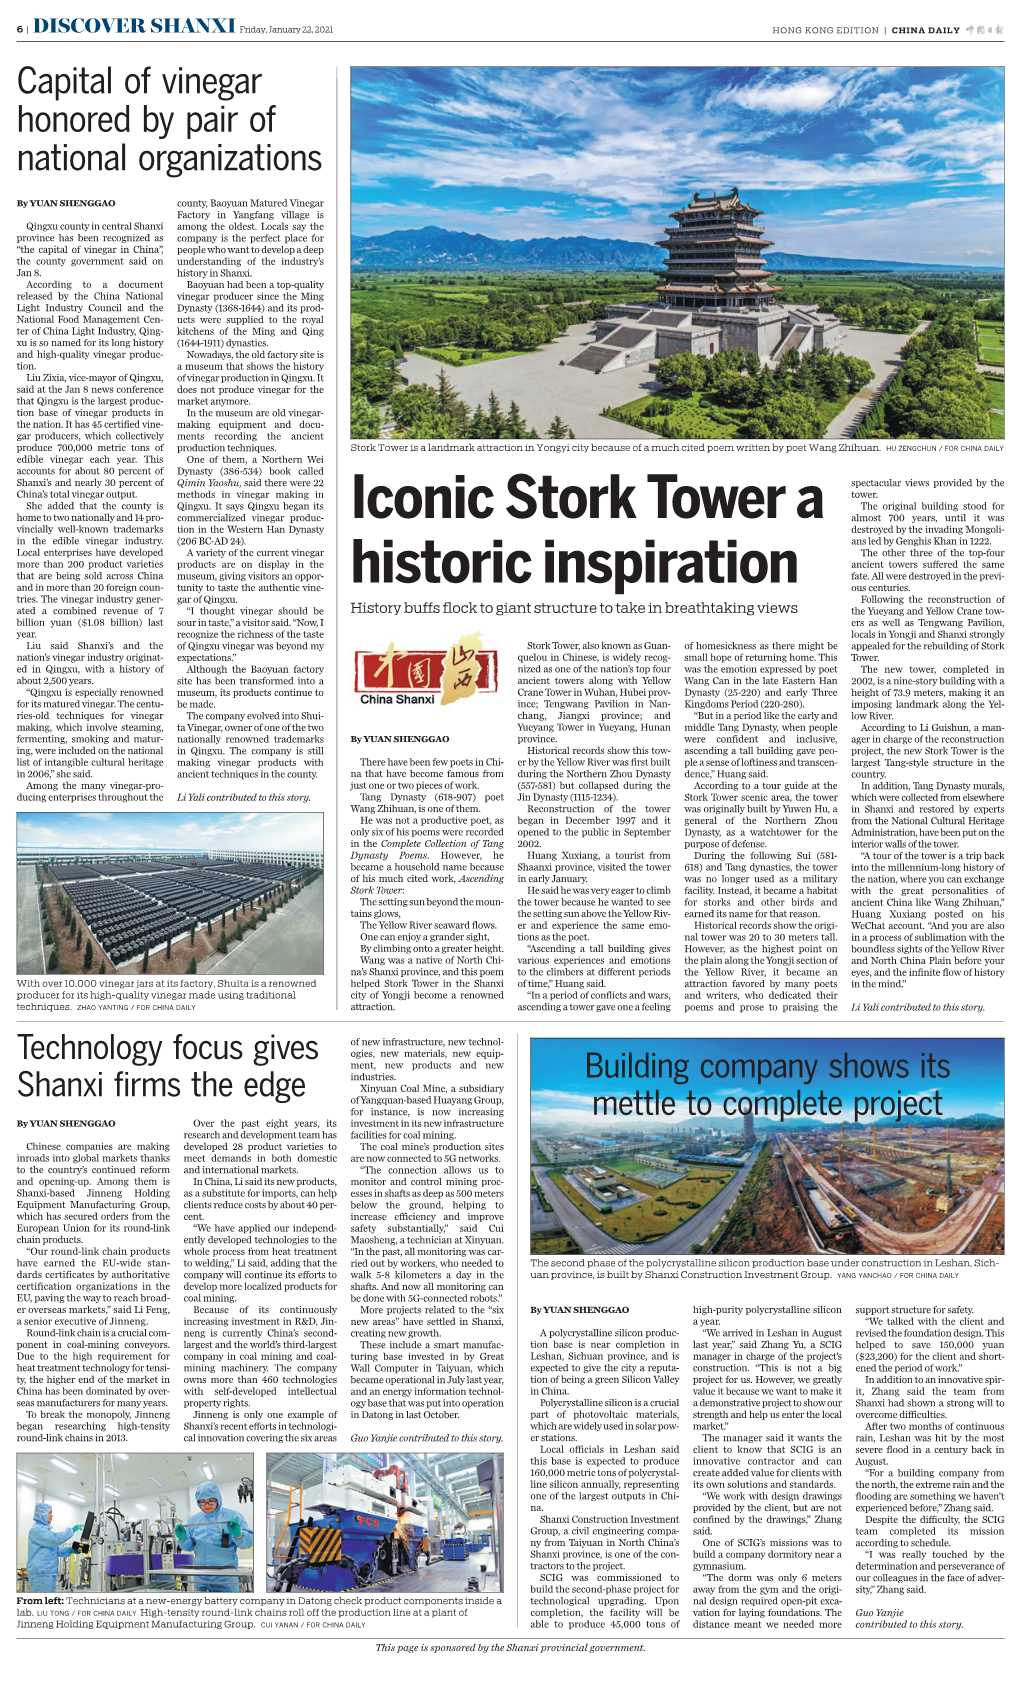 Iconic Stork Tower a Historic Inspiration